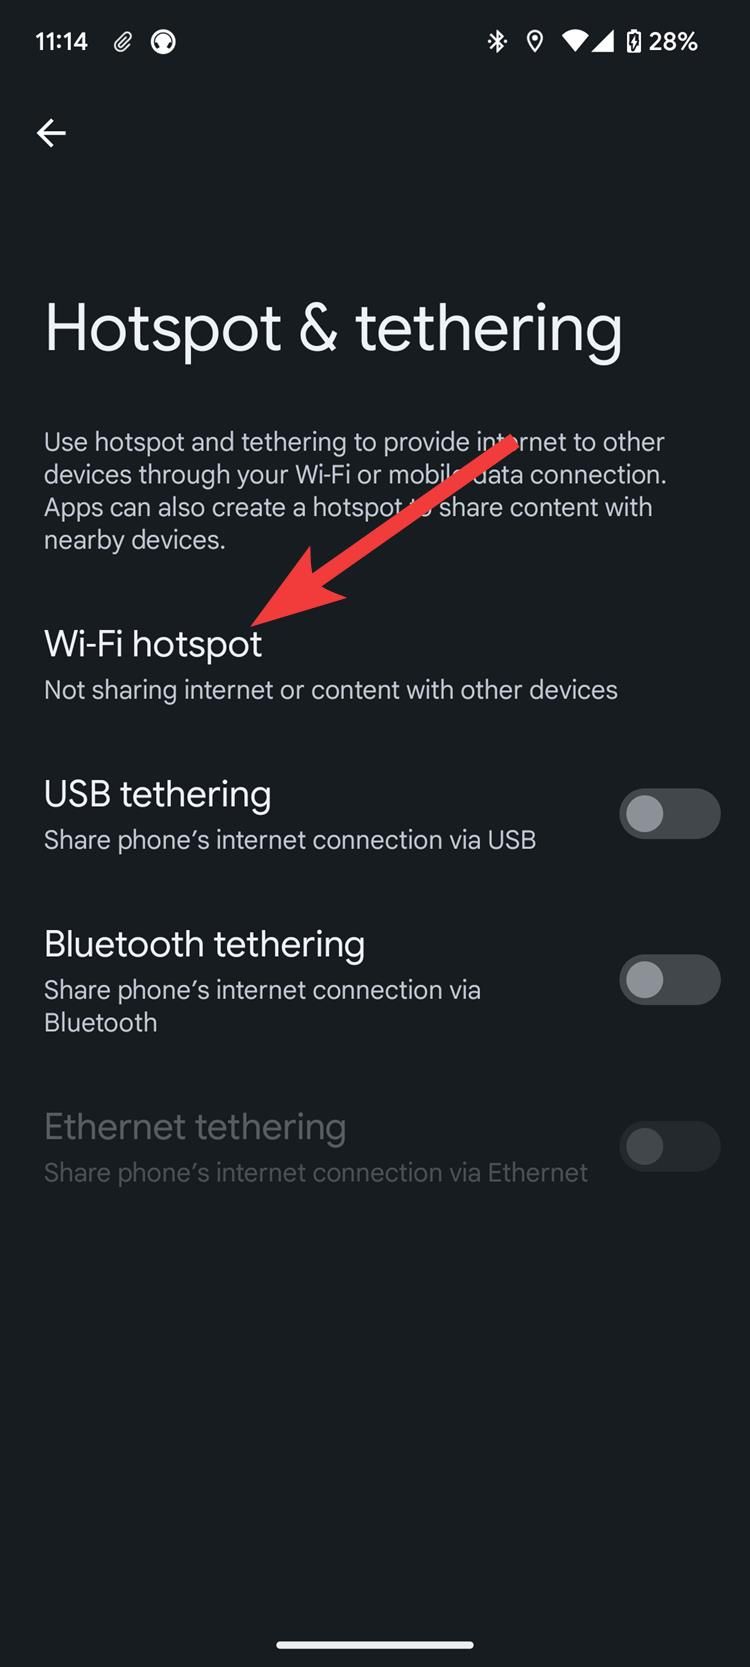 A screenshot of Android settings showing the Wi-Fi hotspot control.